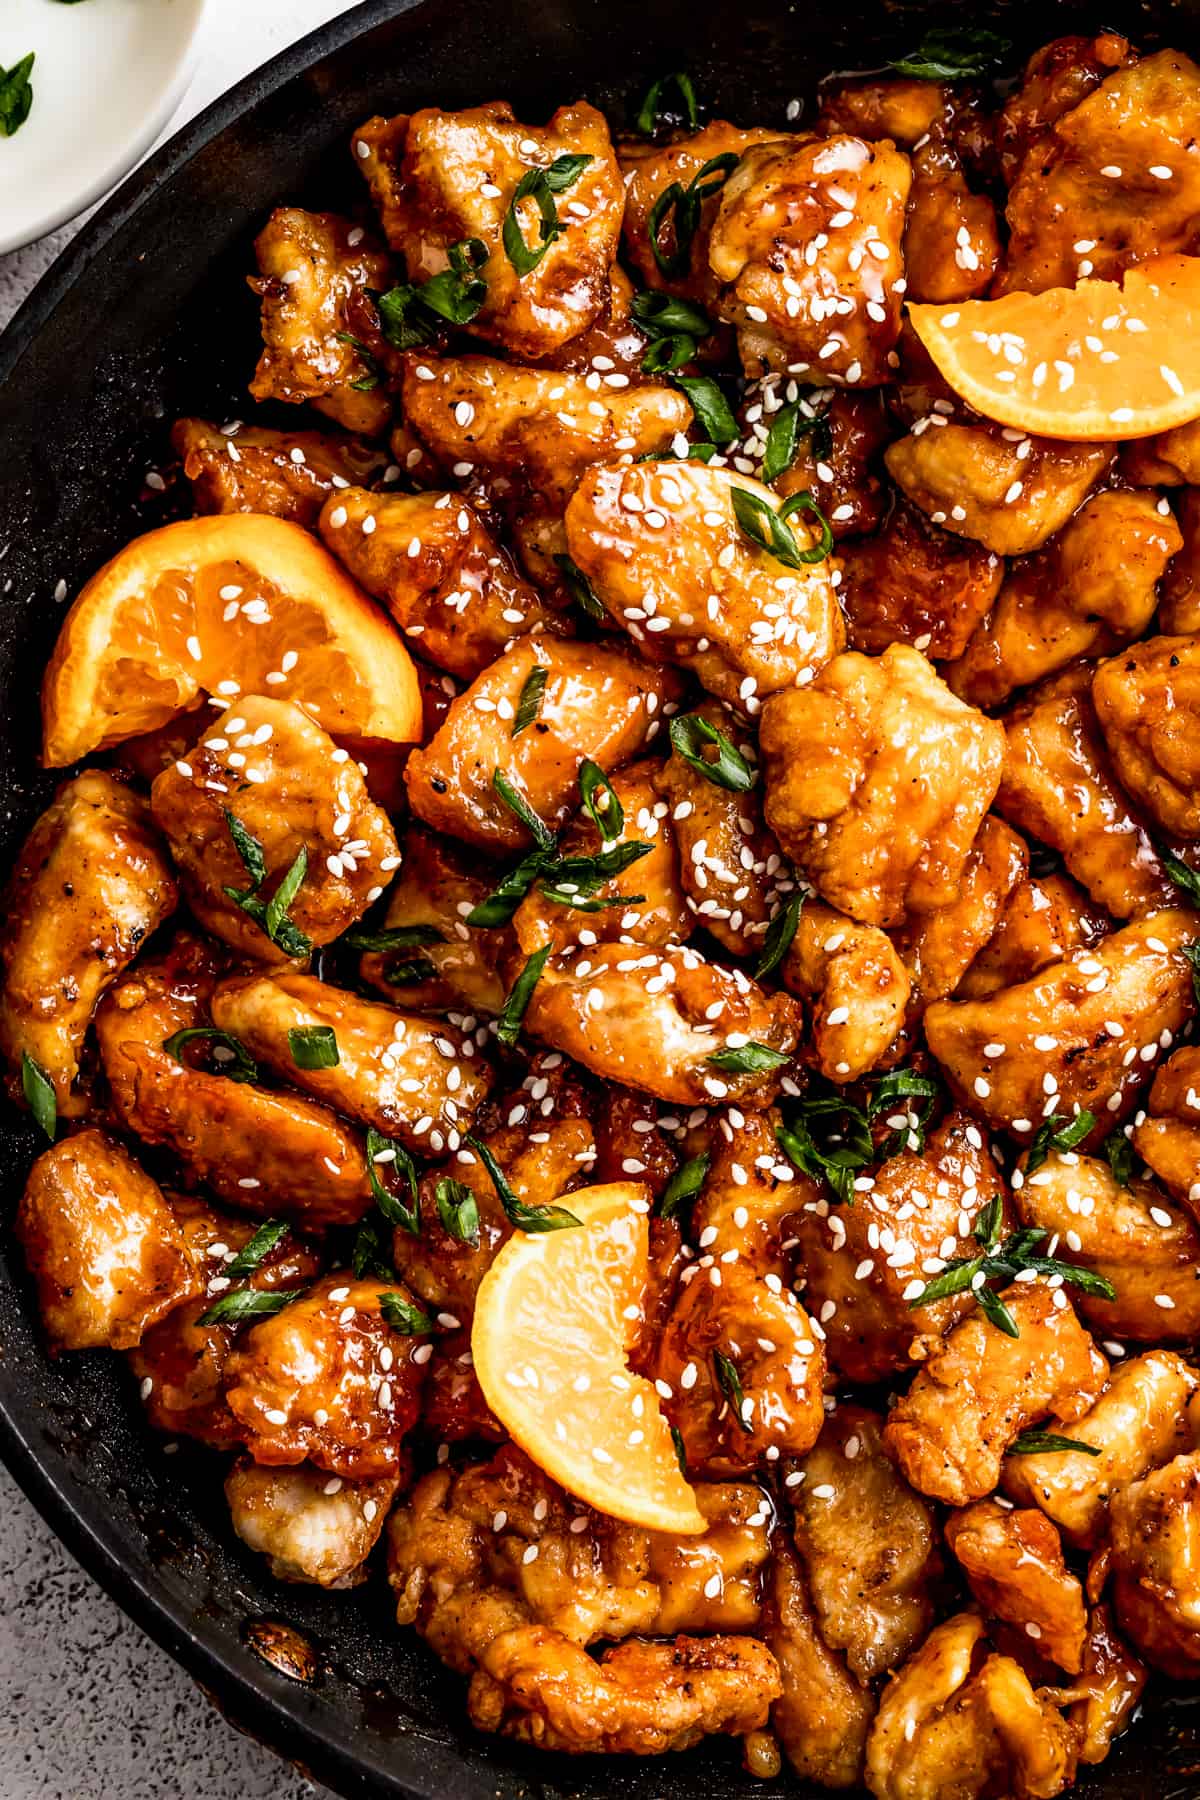 mandarin chicken in a pan, garnished with orange slices, green onions, and sesame seeds.